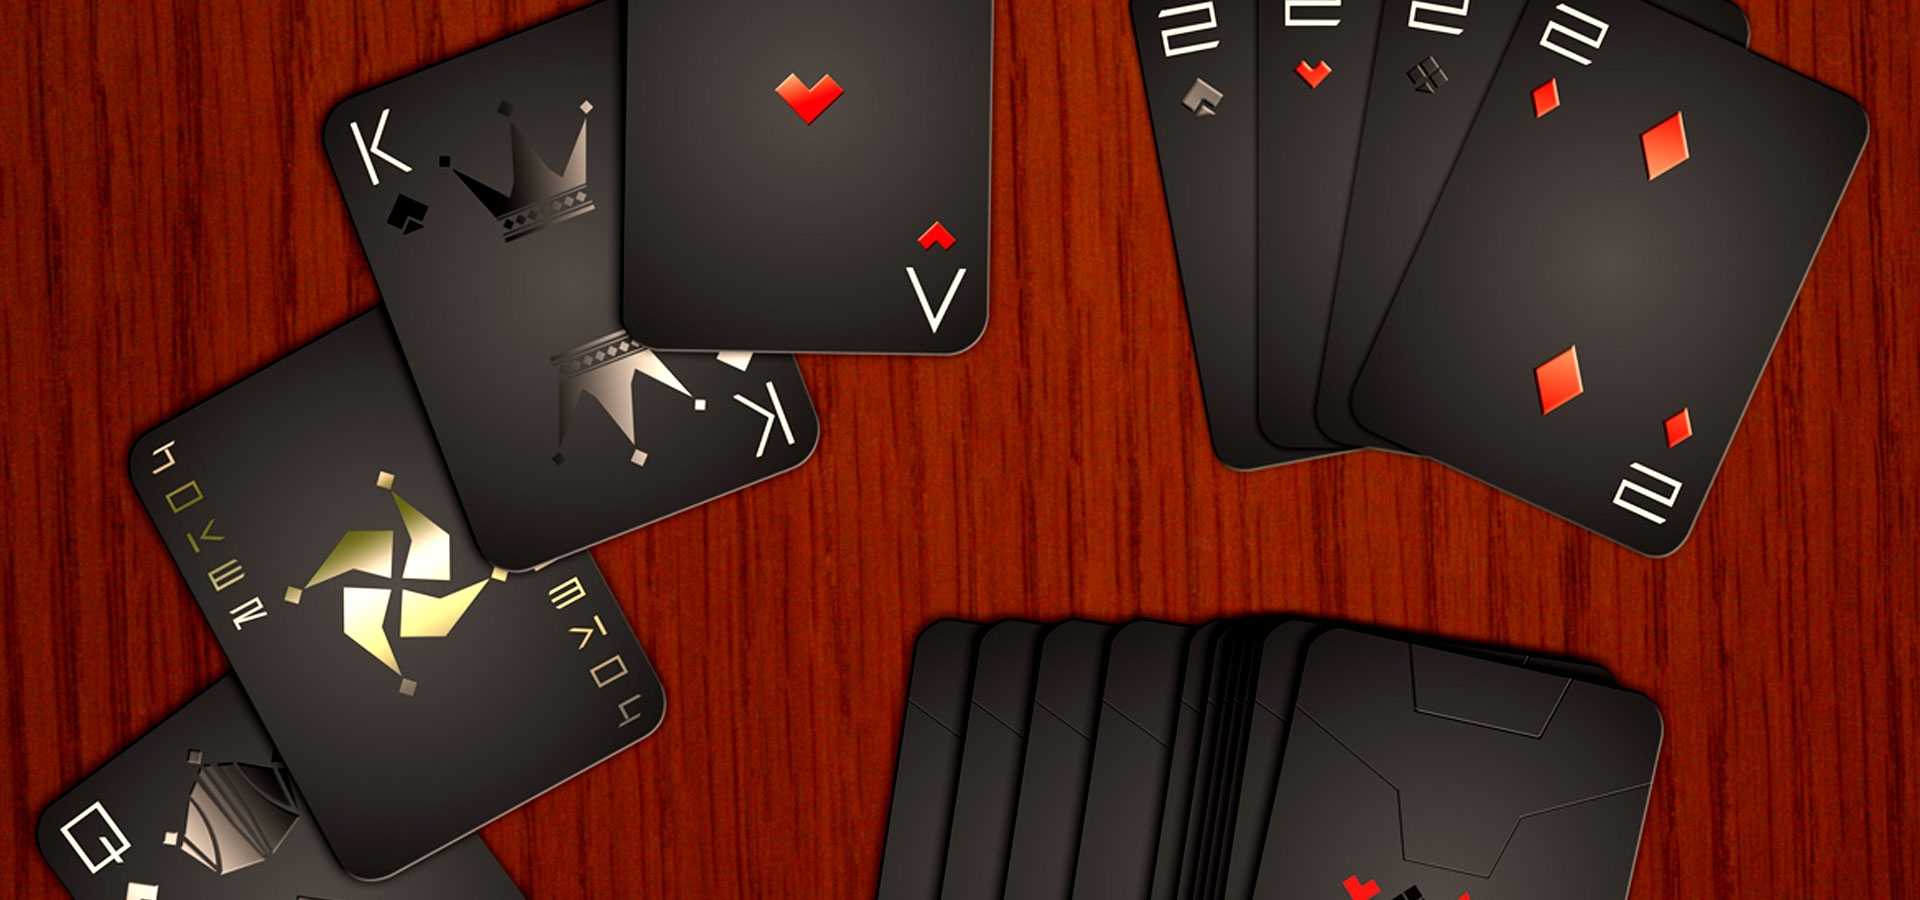 22+ Playing Card Designs | Free & Premium Templates In Playing Card Design Template